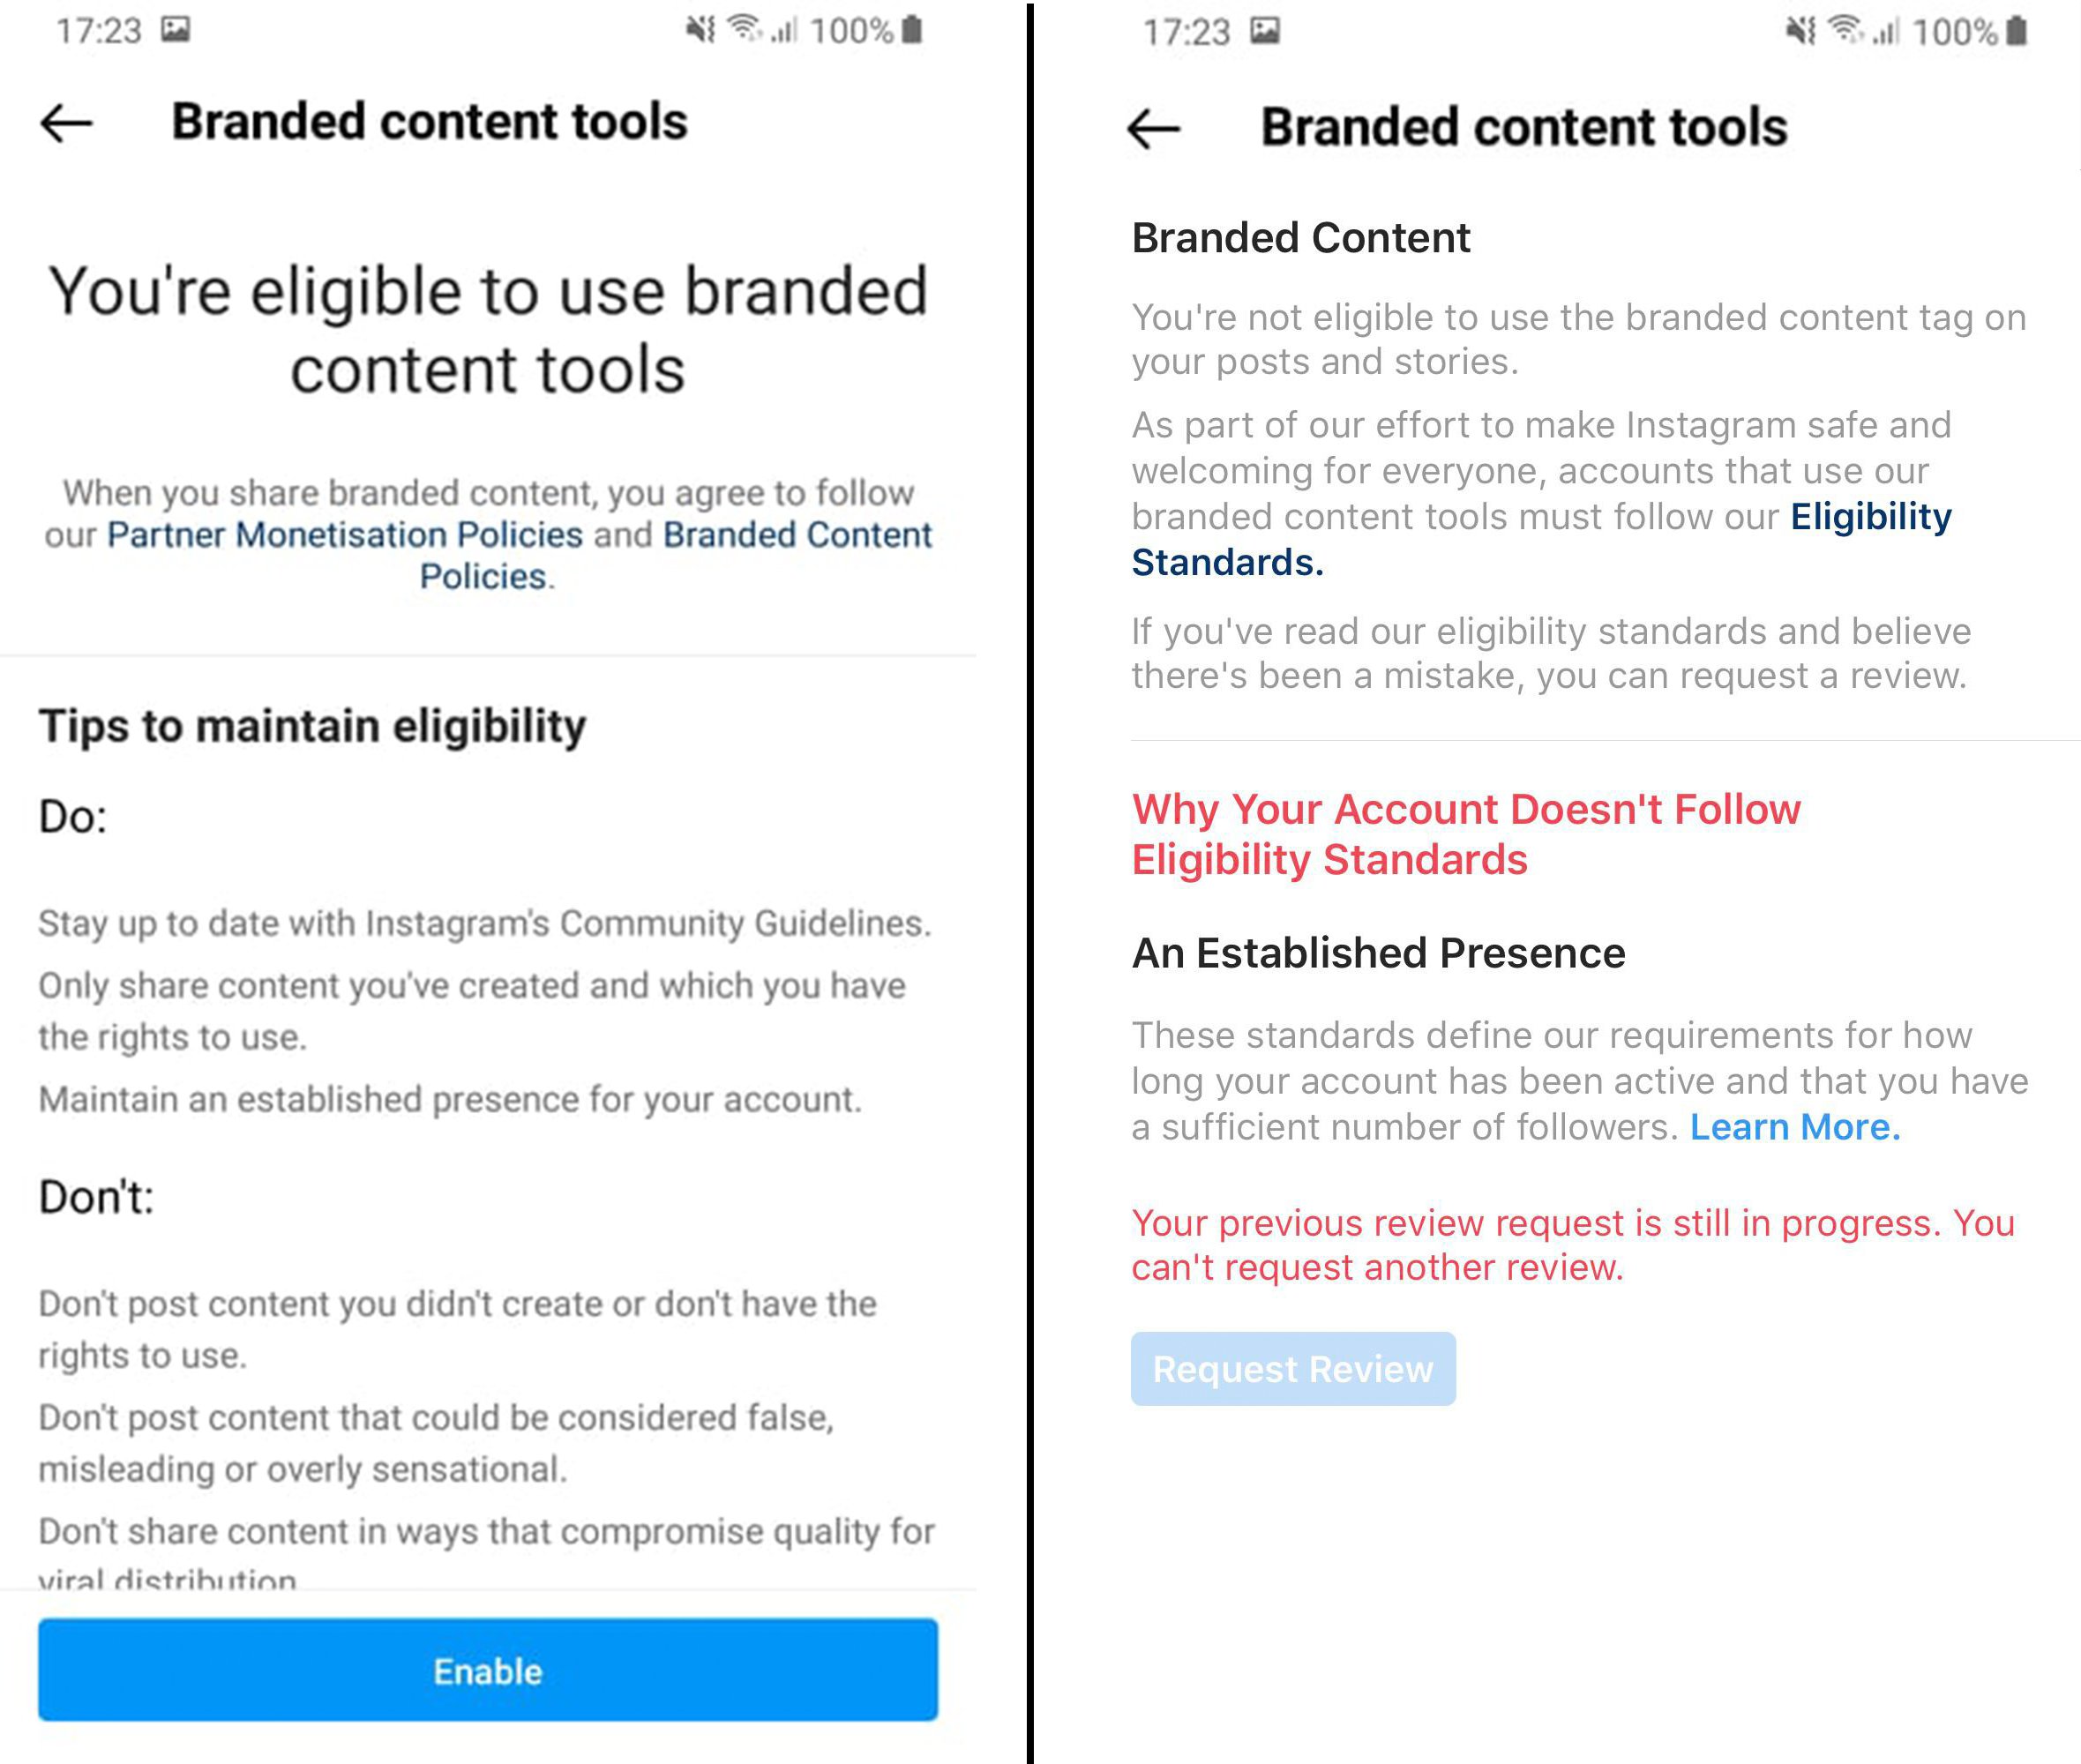 Branded content tool eligibility